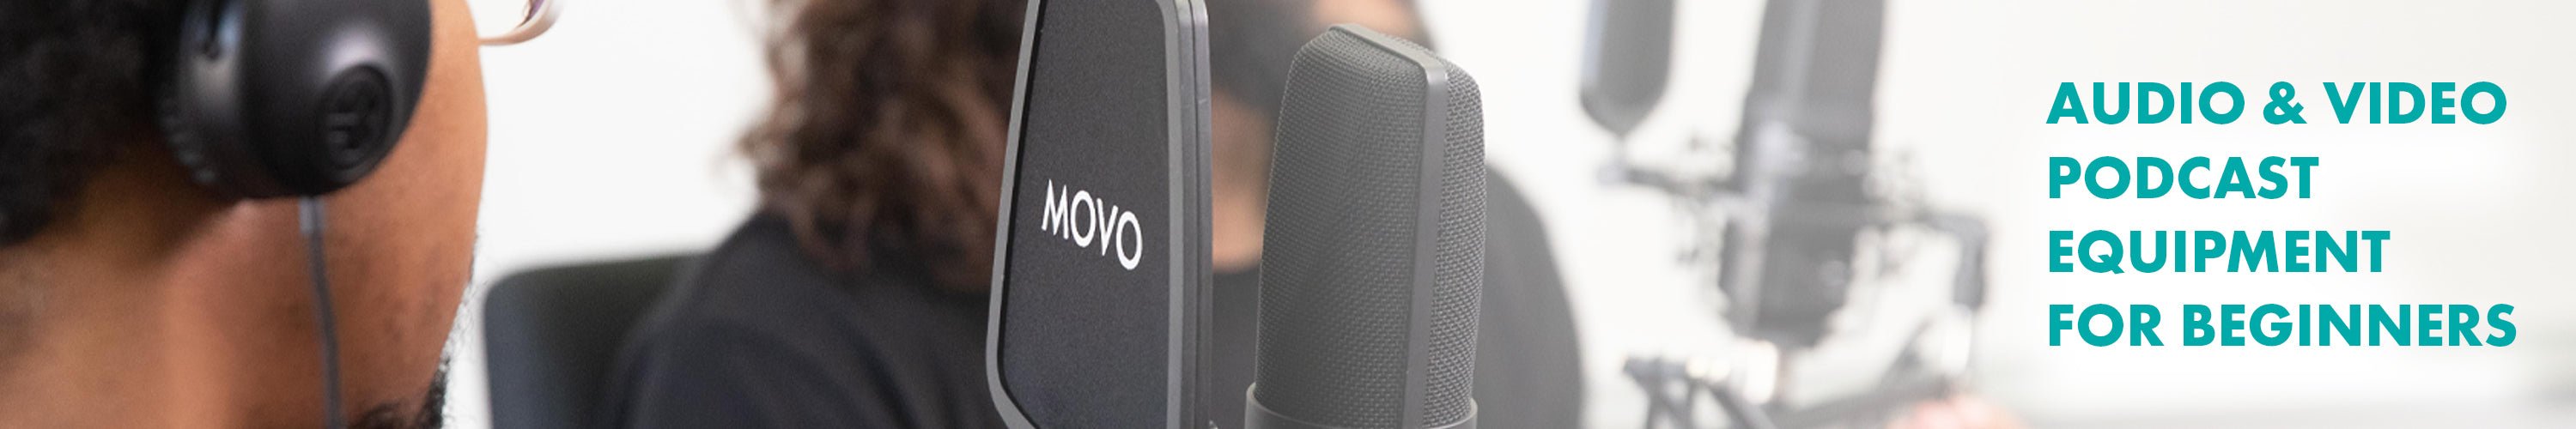 Audio & Video Podcast Equipment for Beginners - Movo